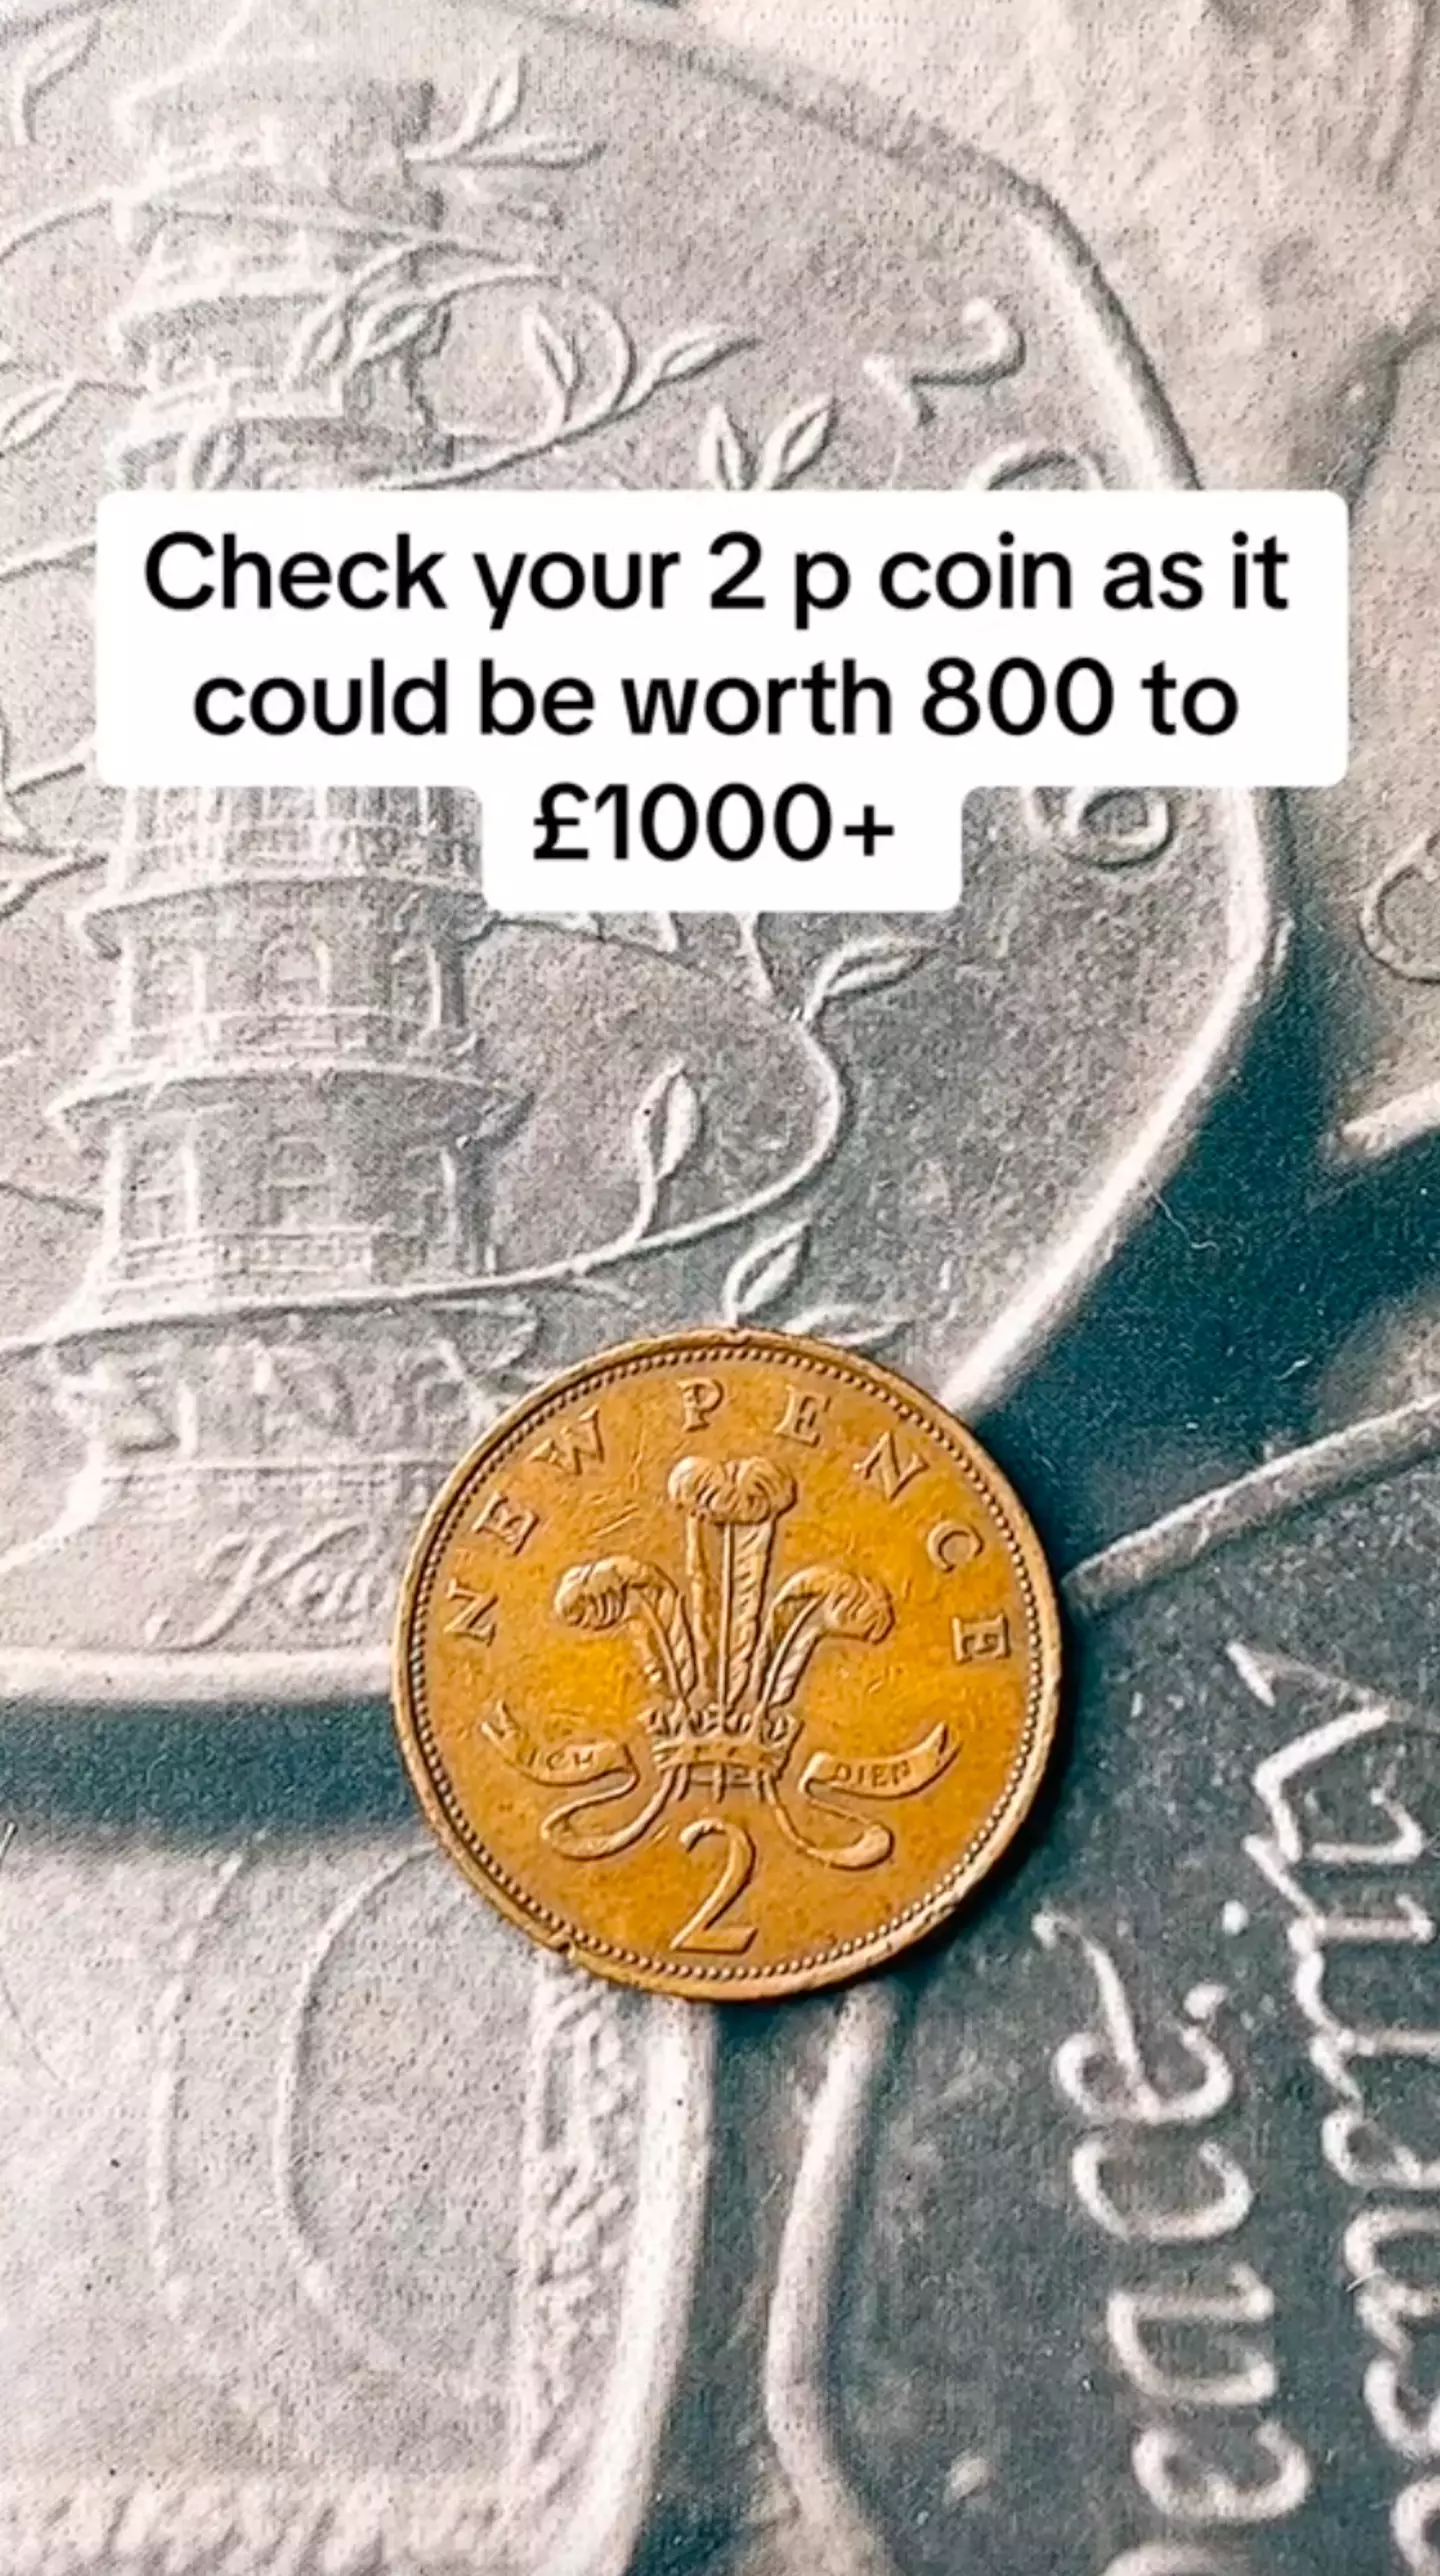 Coin collector urges people to check their bags to find a 2p coin worth up to a grand.